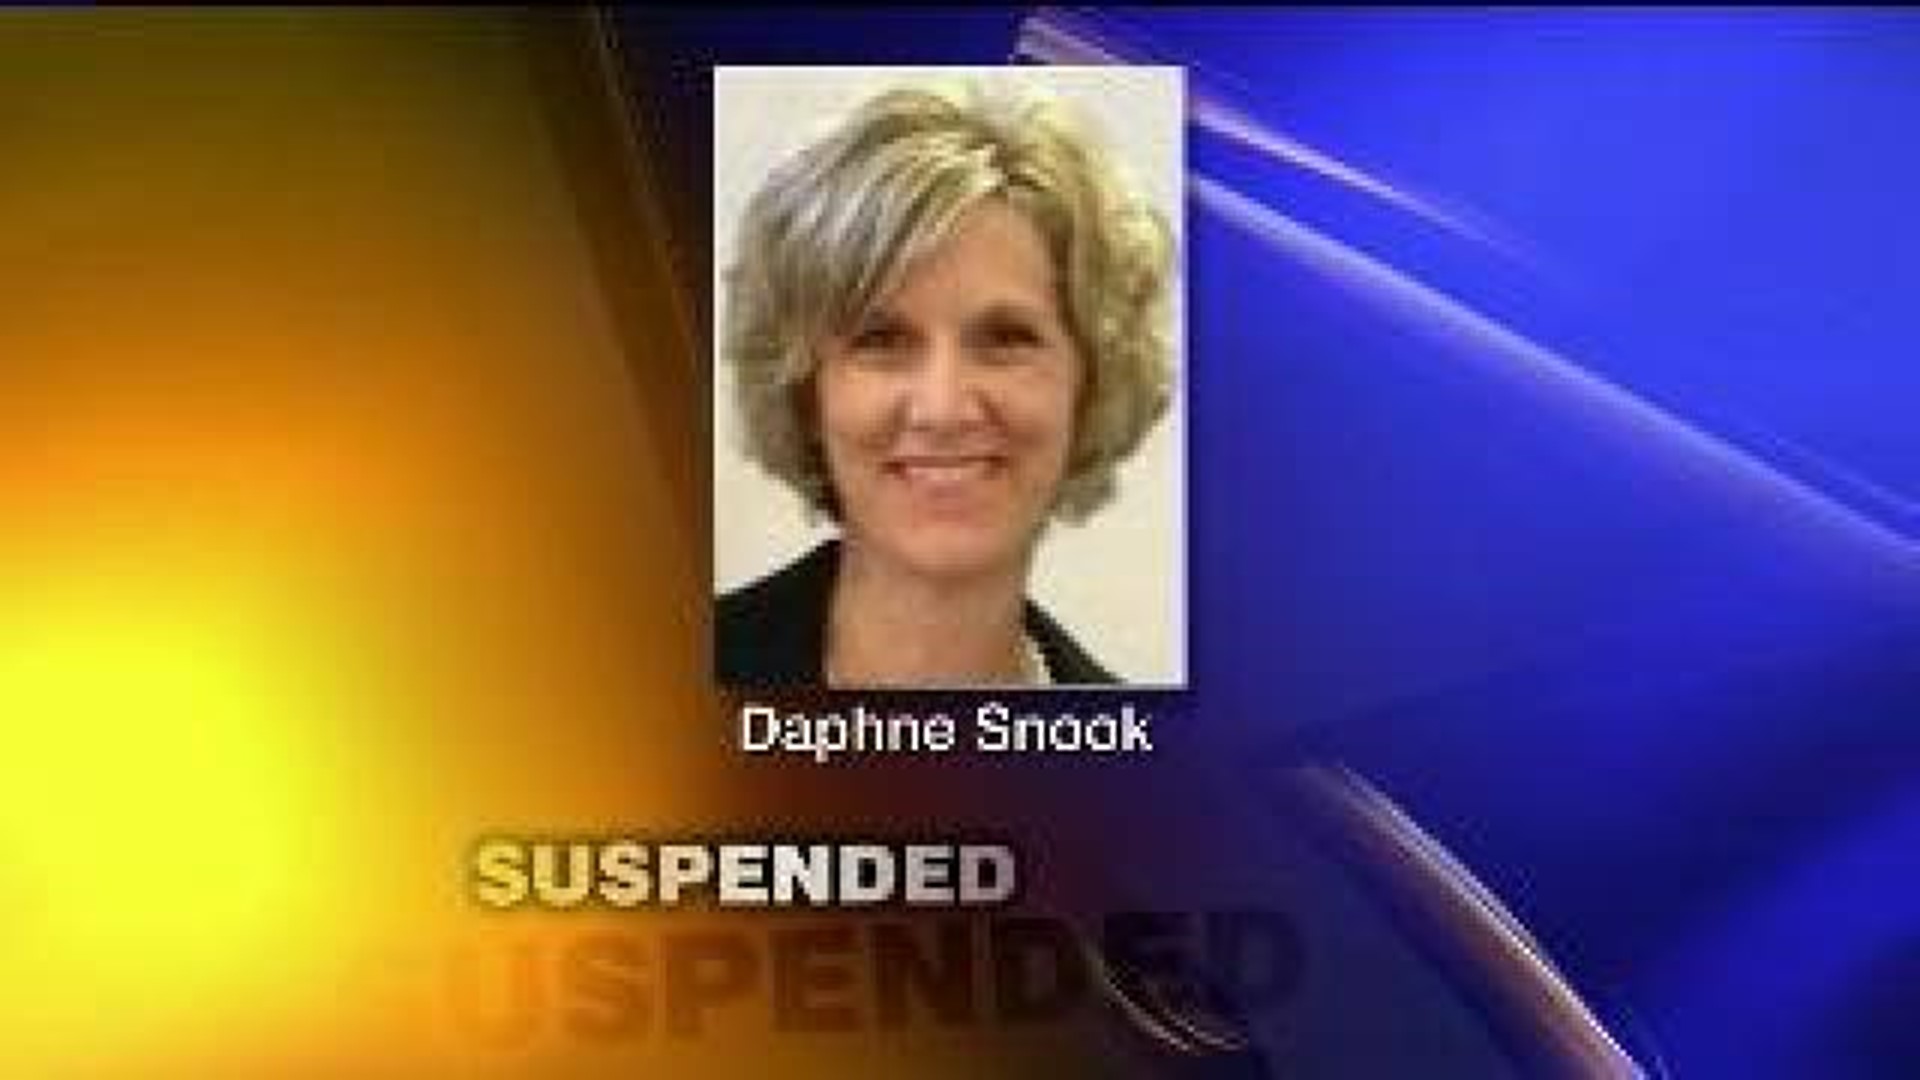 Superintendent Suspended for Suspected Data Breach